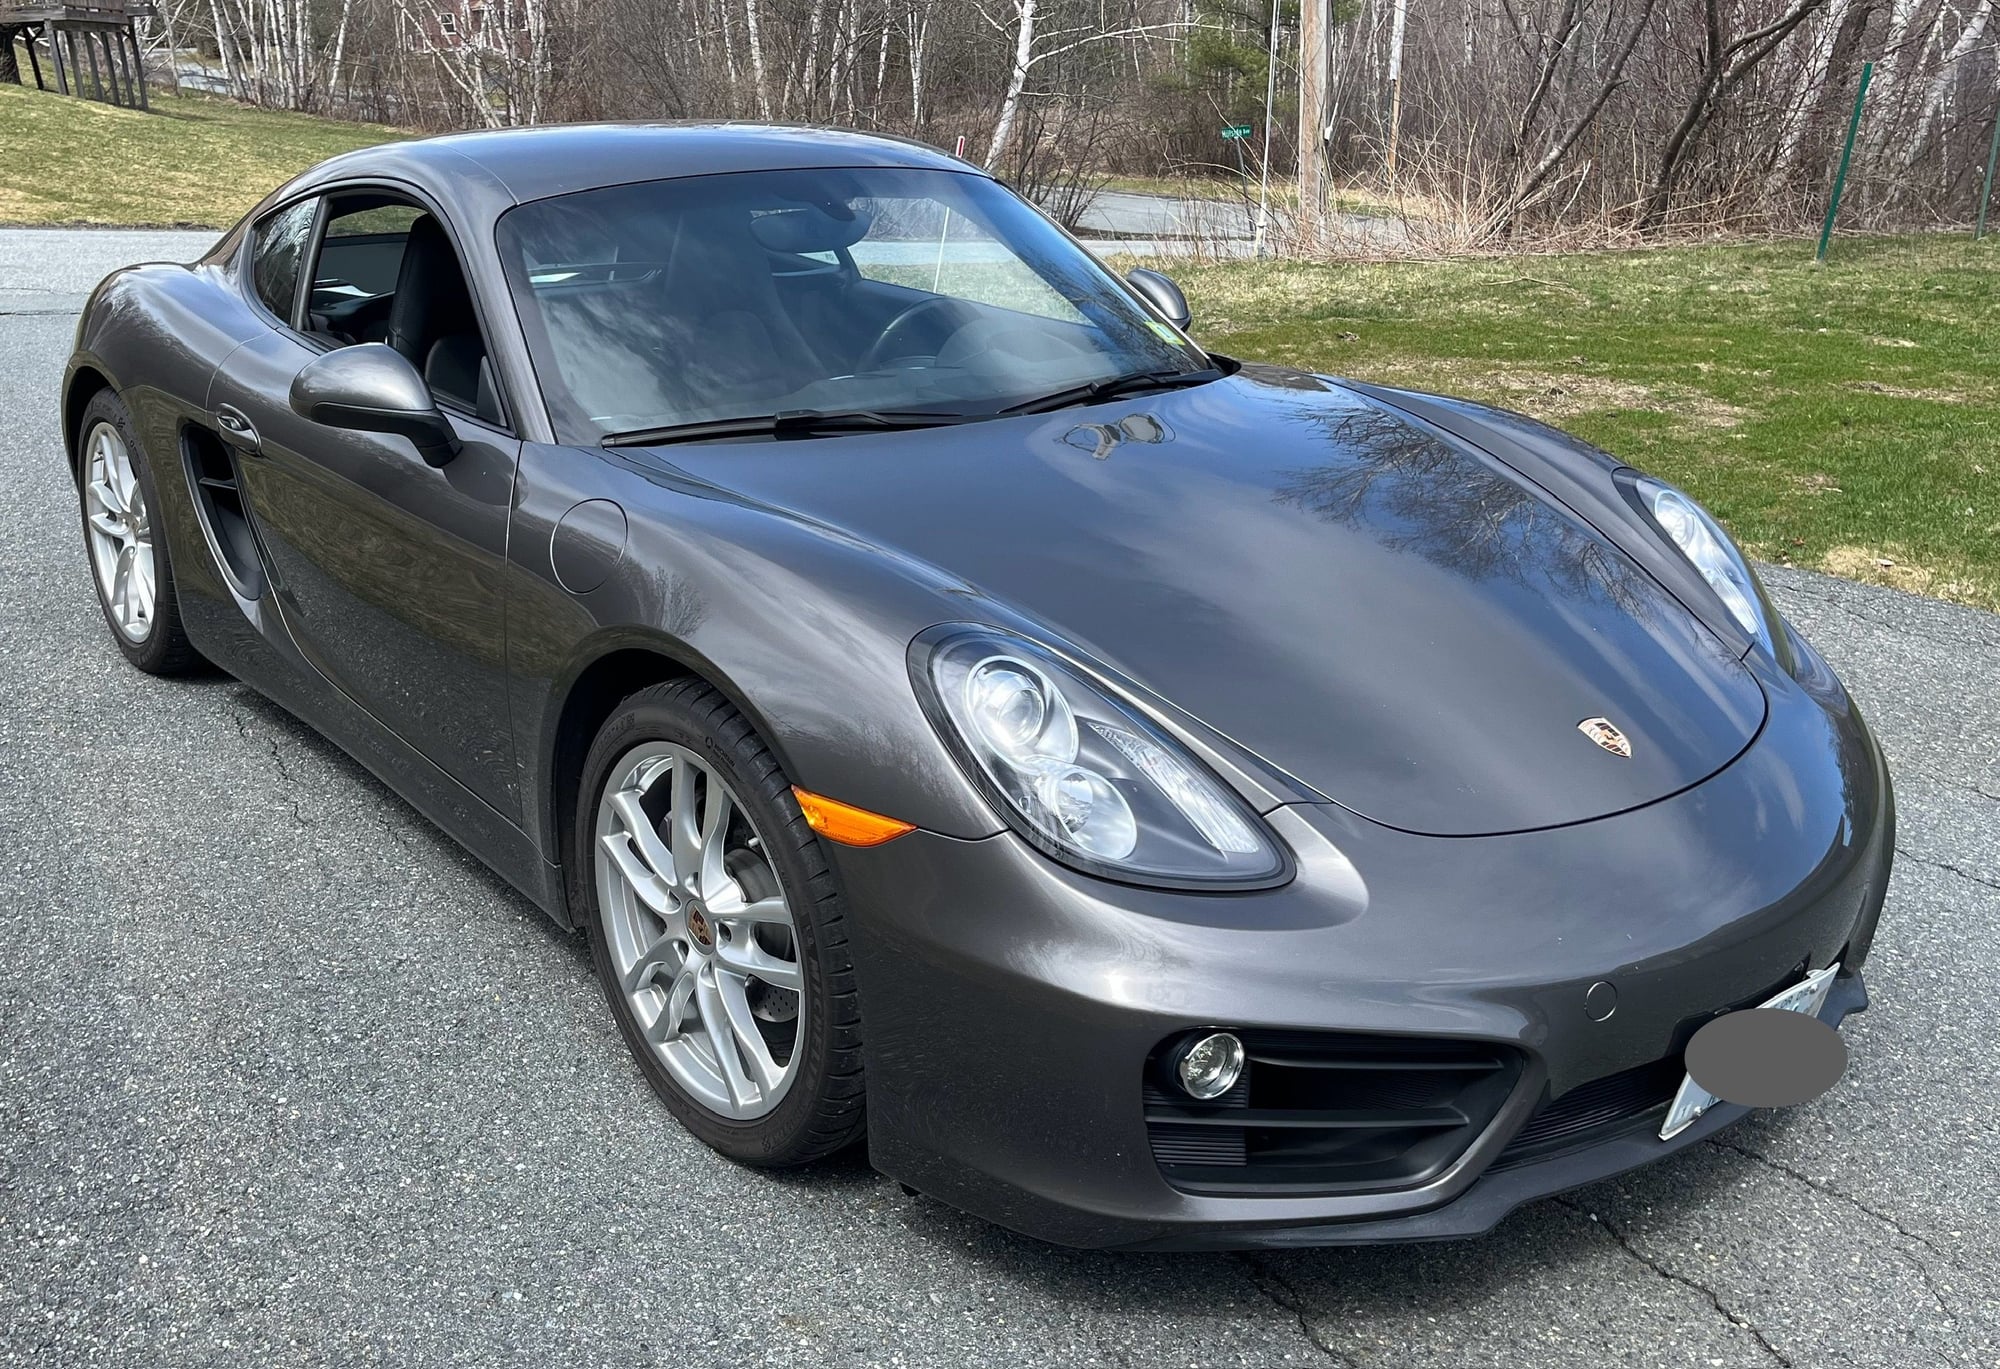 2015 Porsche Cayman - 2015 Porsche Cayman One Owner 6 Speed - Used - VIN WP0AA2A85FK164536 - 6 cyl - 2WD - Manual - Coupe - Gray - Lebanon, NH 03766, United States